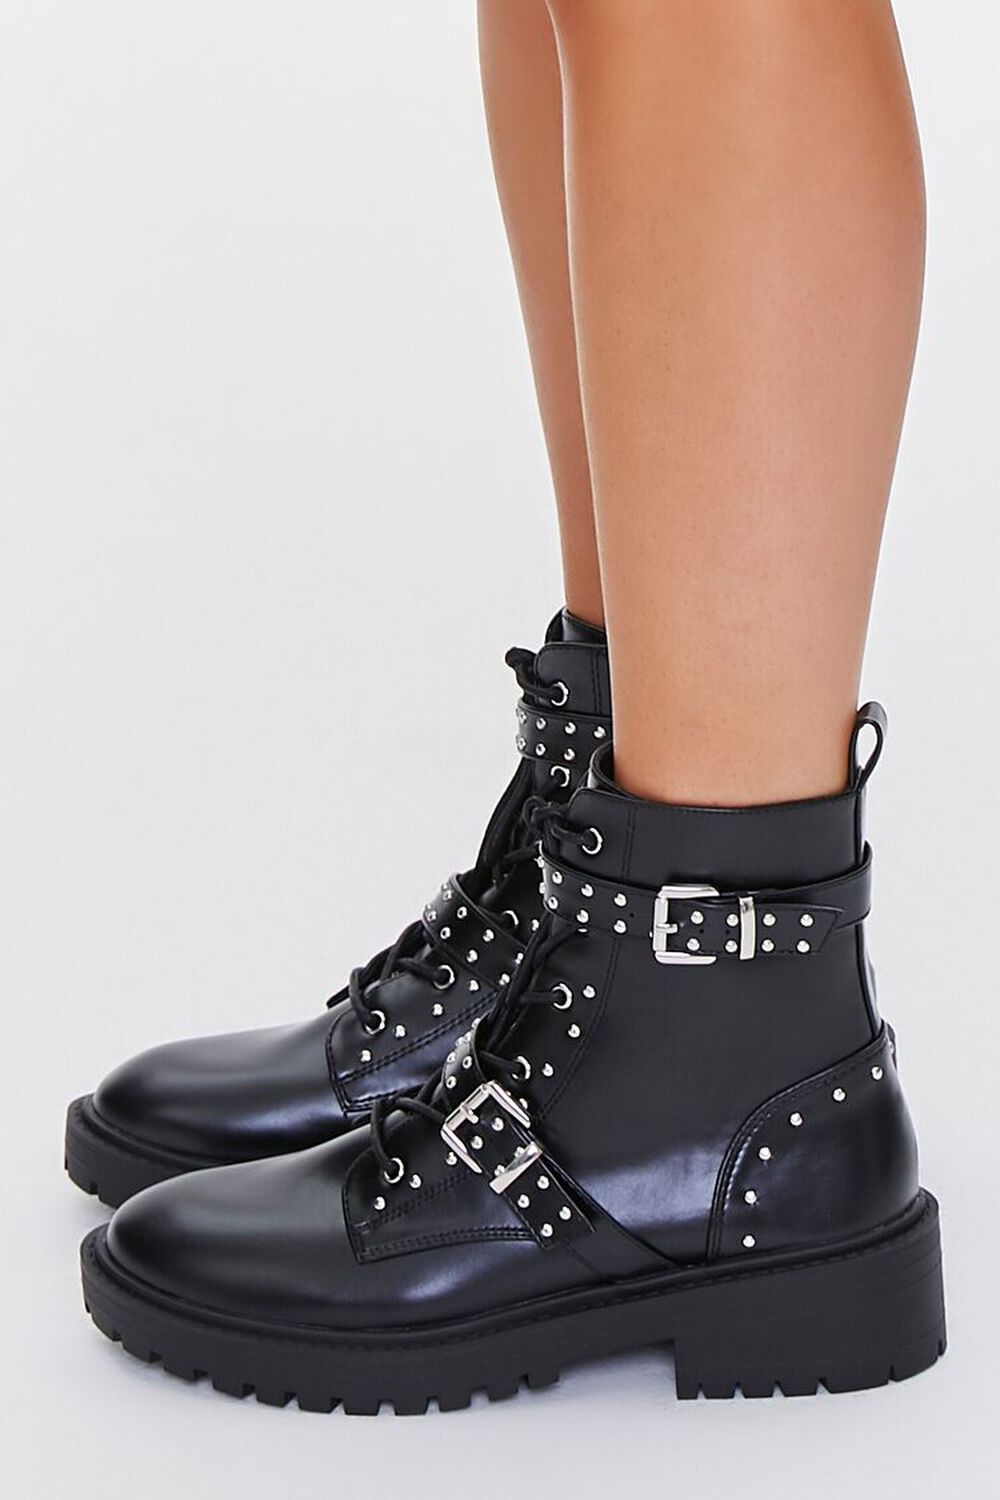 Studded Buckled-Strap Combat Boots